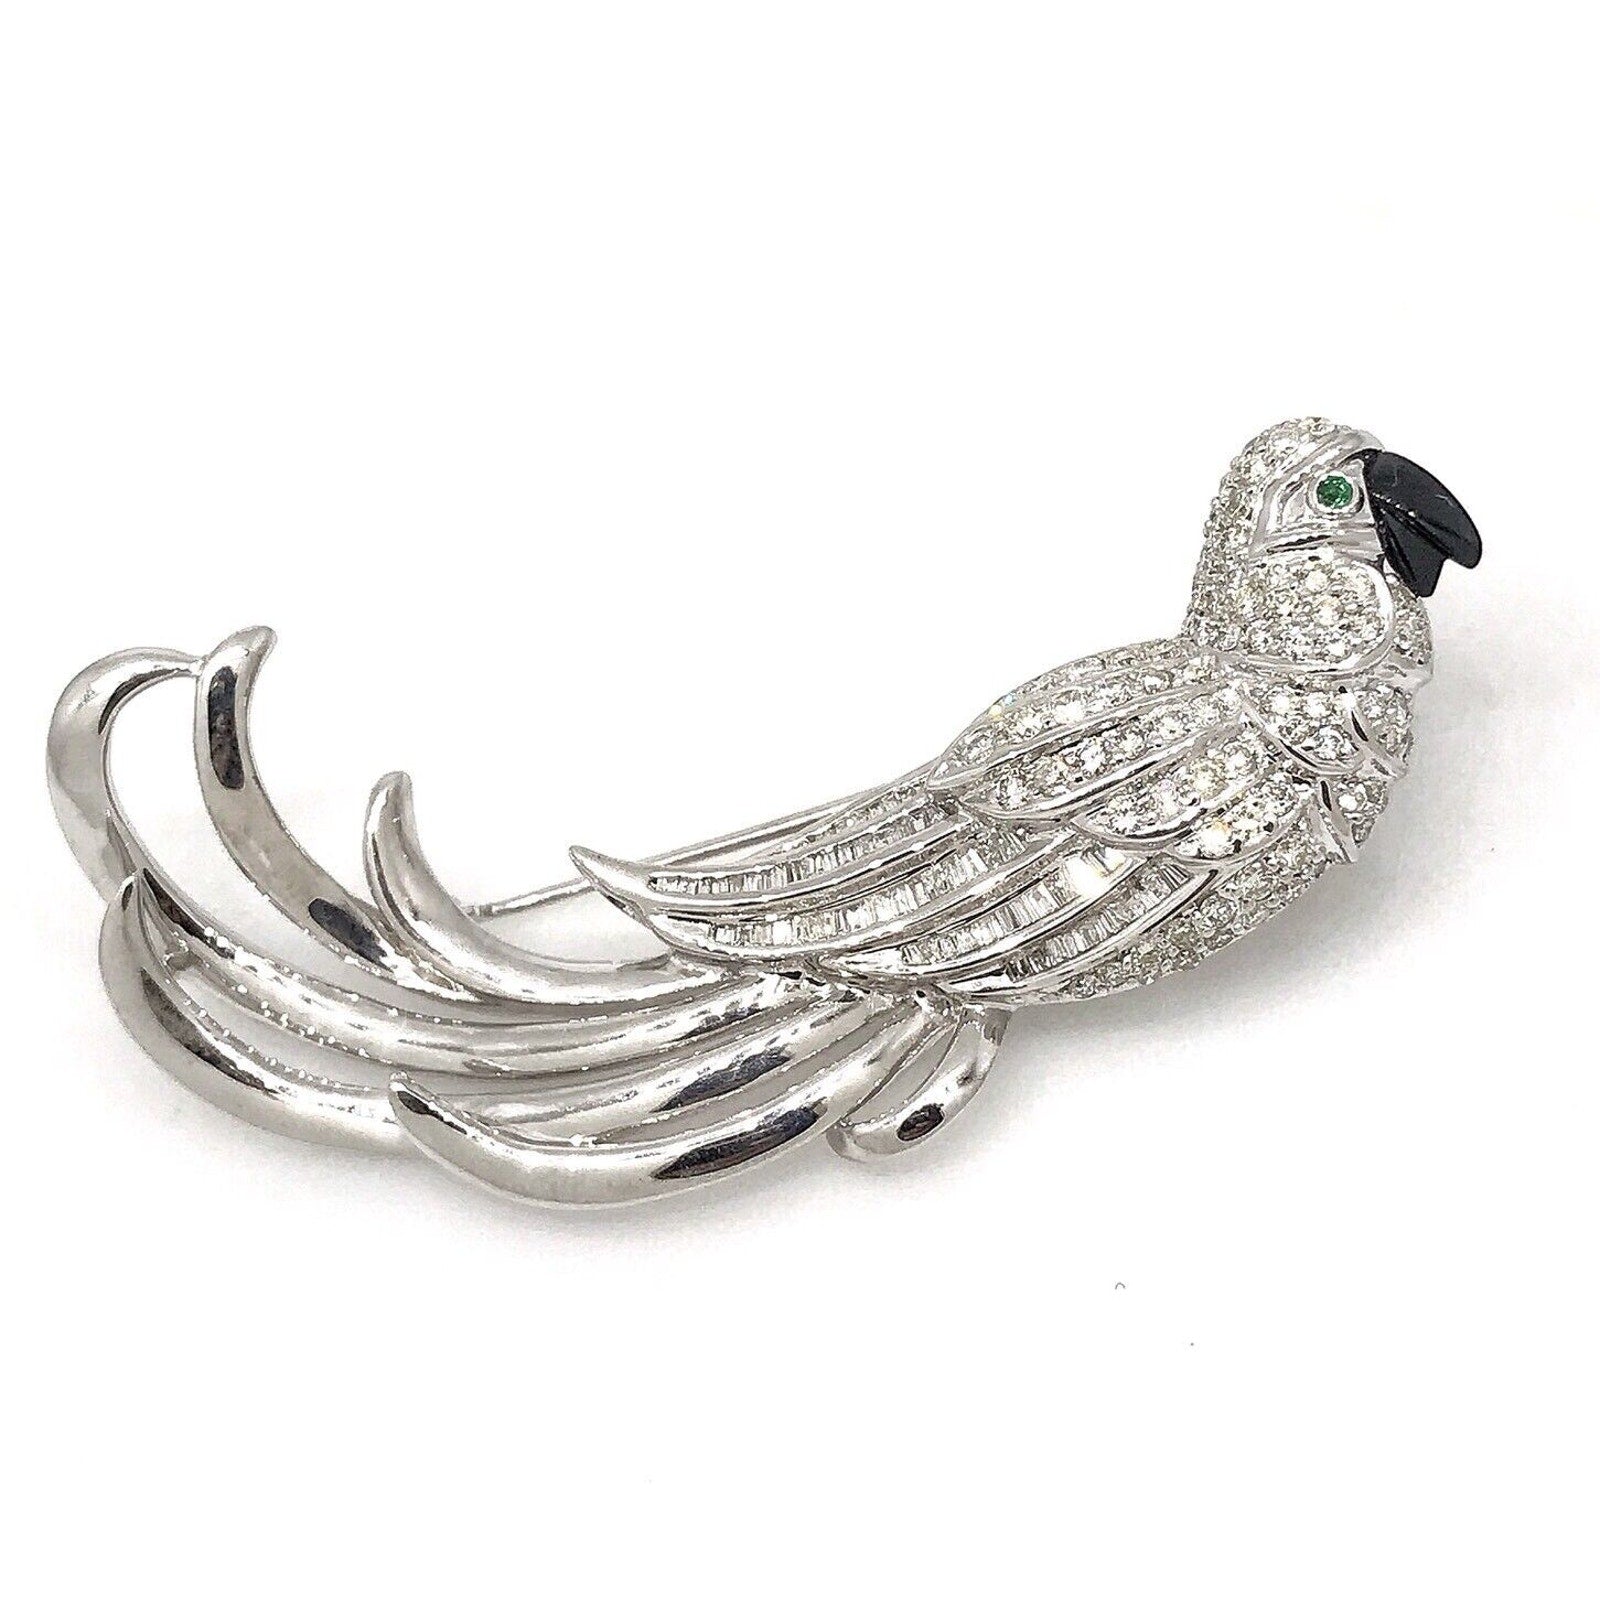 Diamond and Onyx Parrot Pin/Brooch with Emerald Eye in 18k White Gold